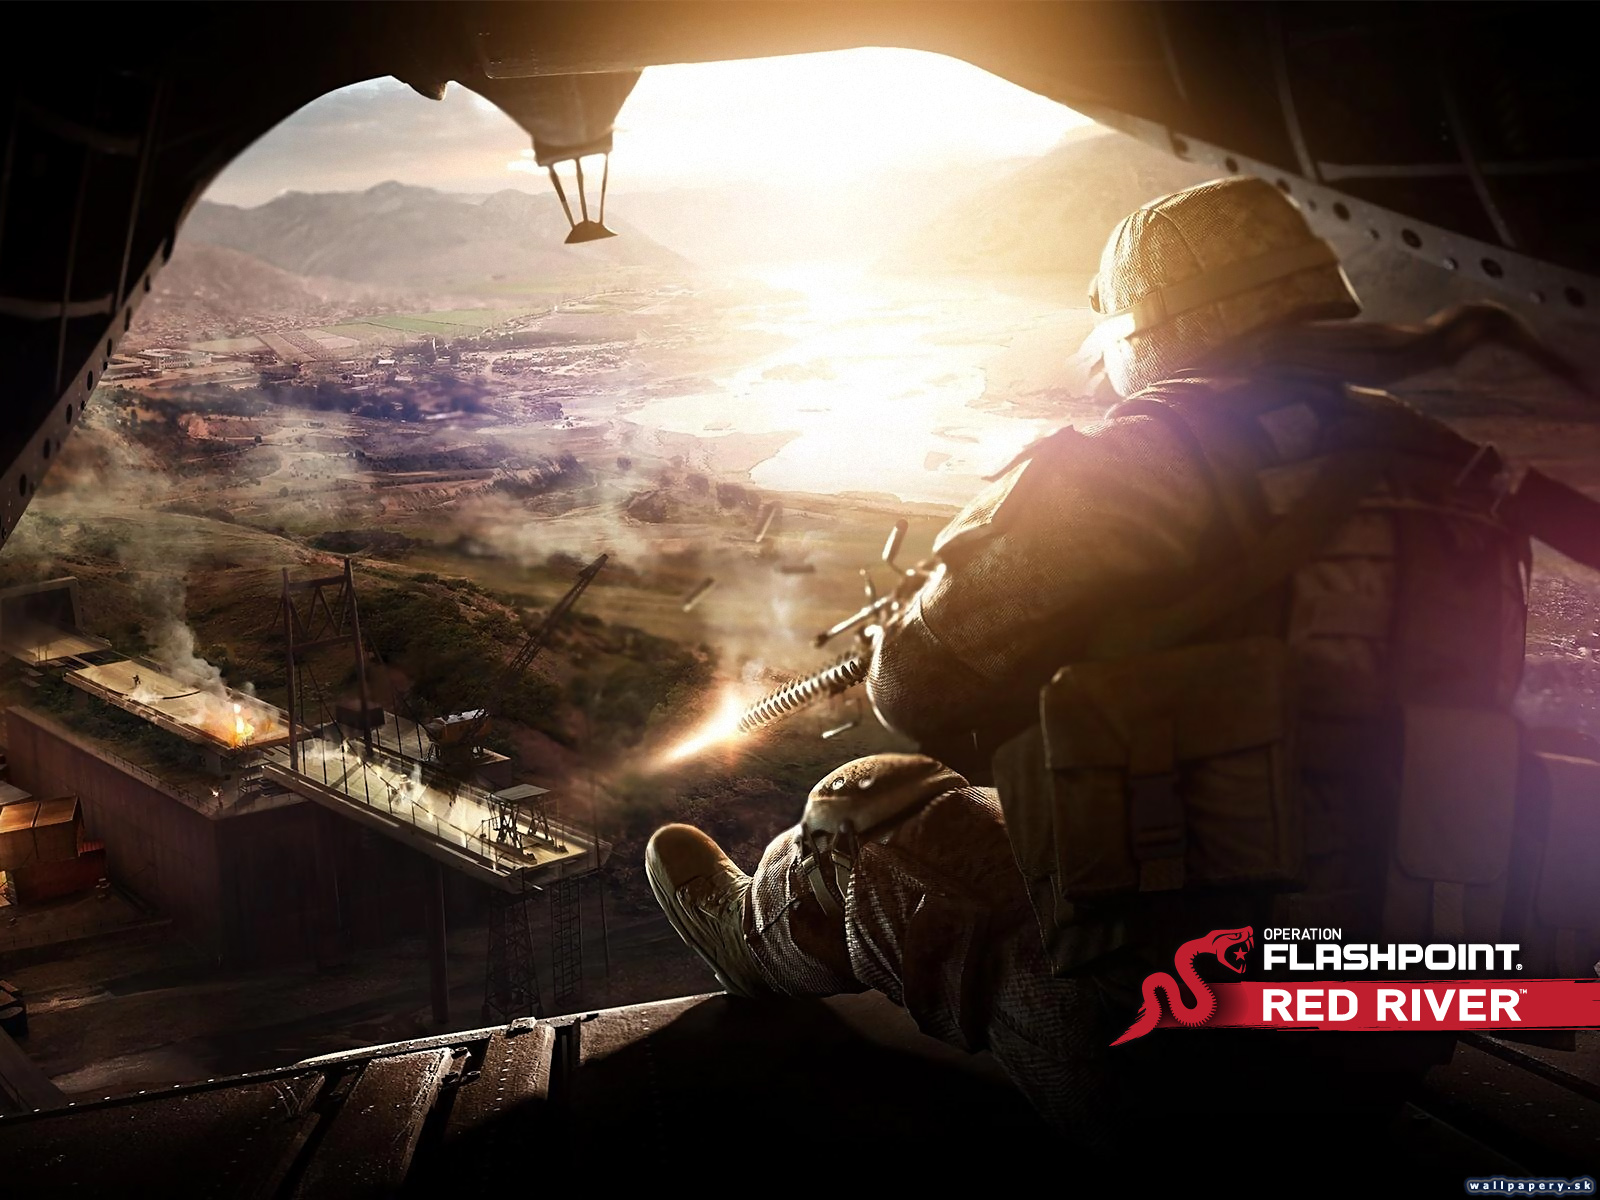 Operation Flashpoint: Red River - wallpaper 10